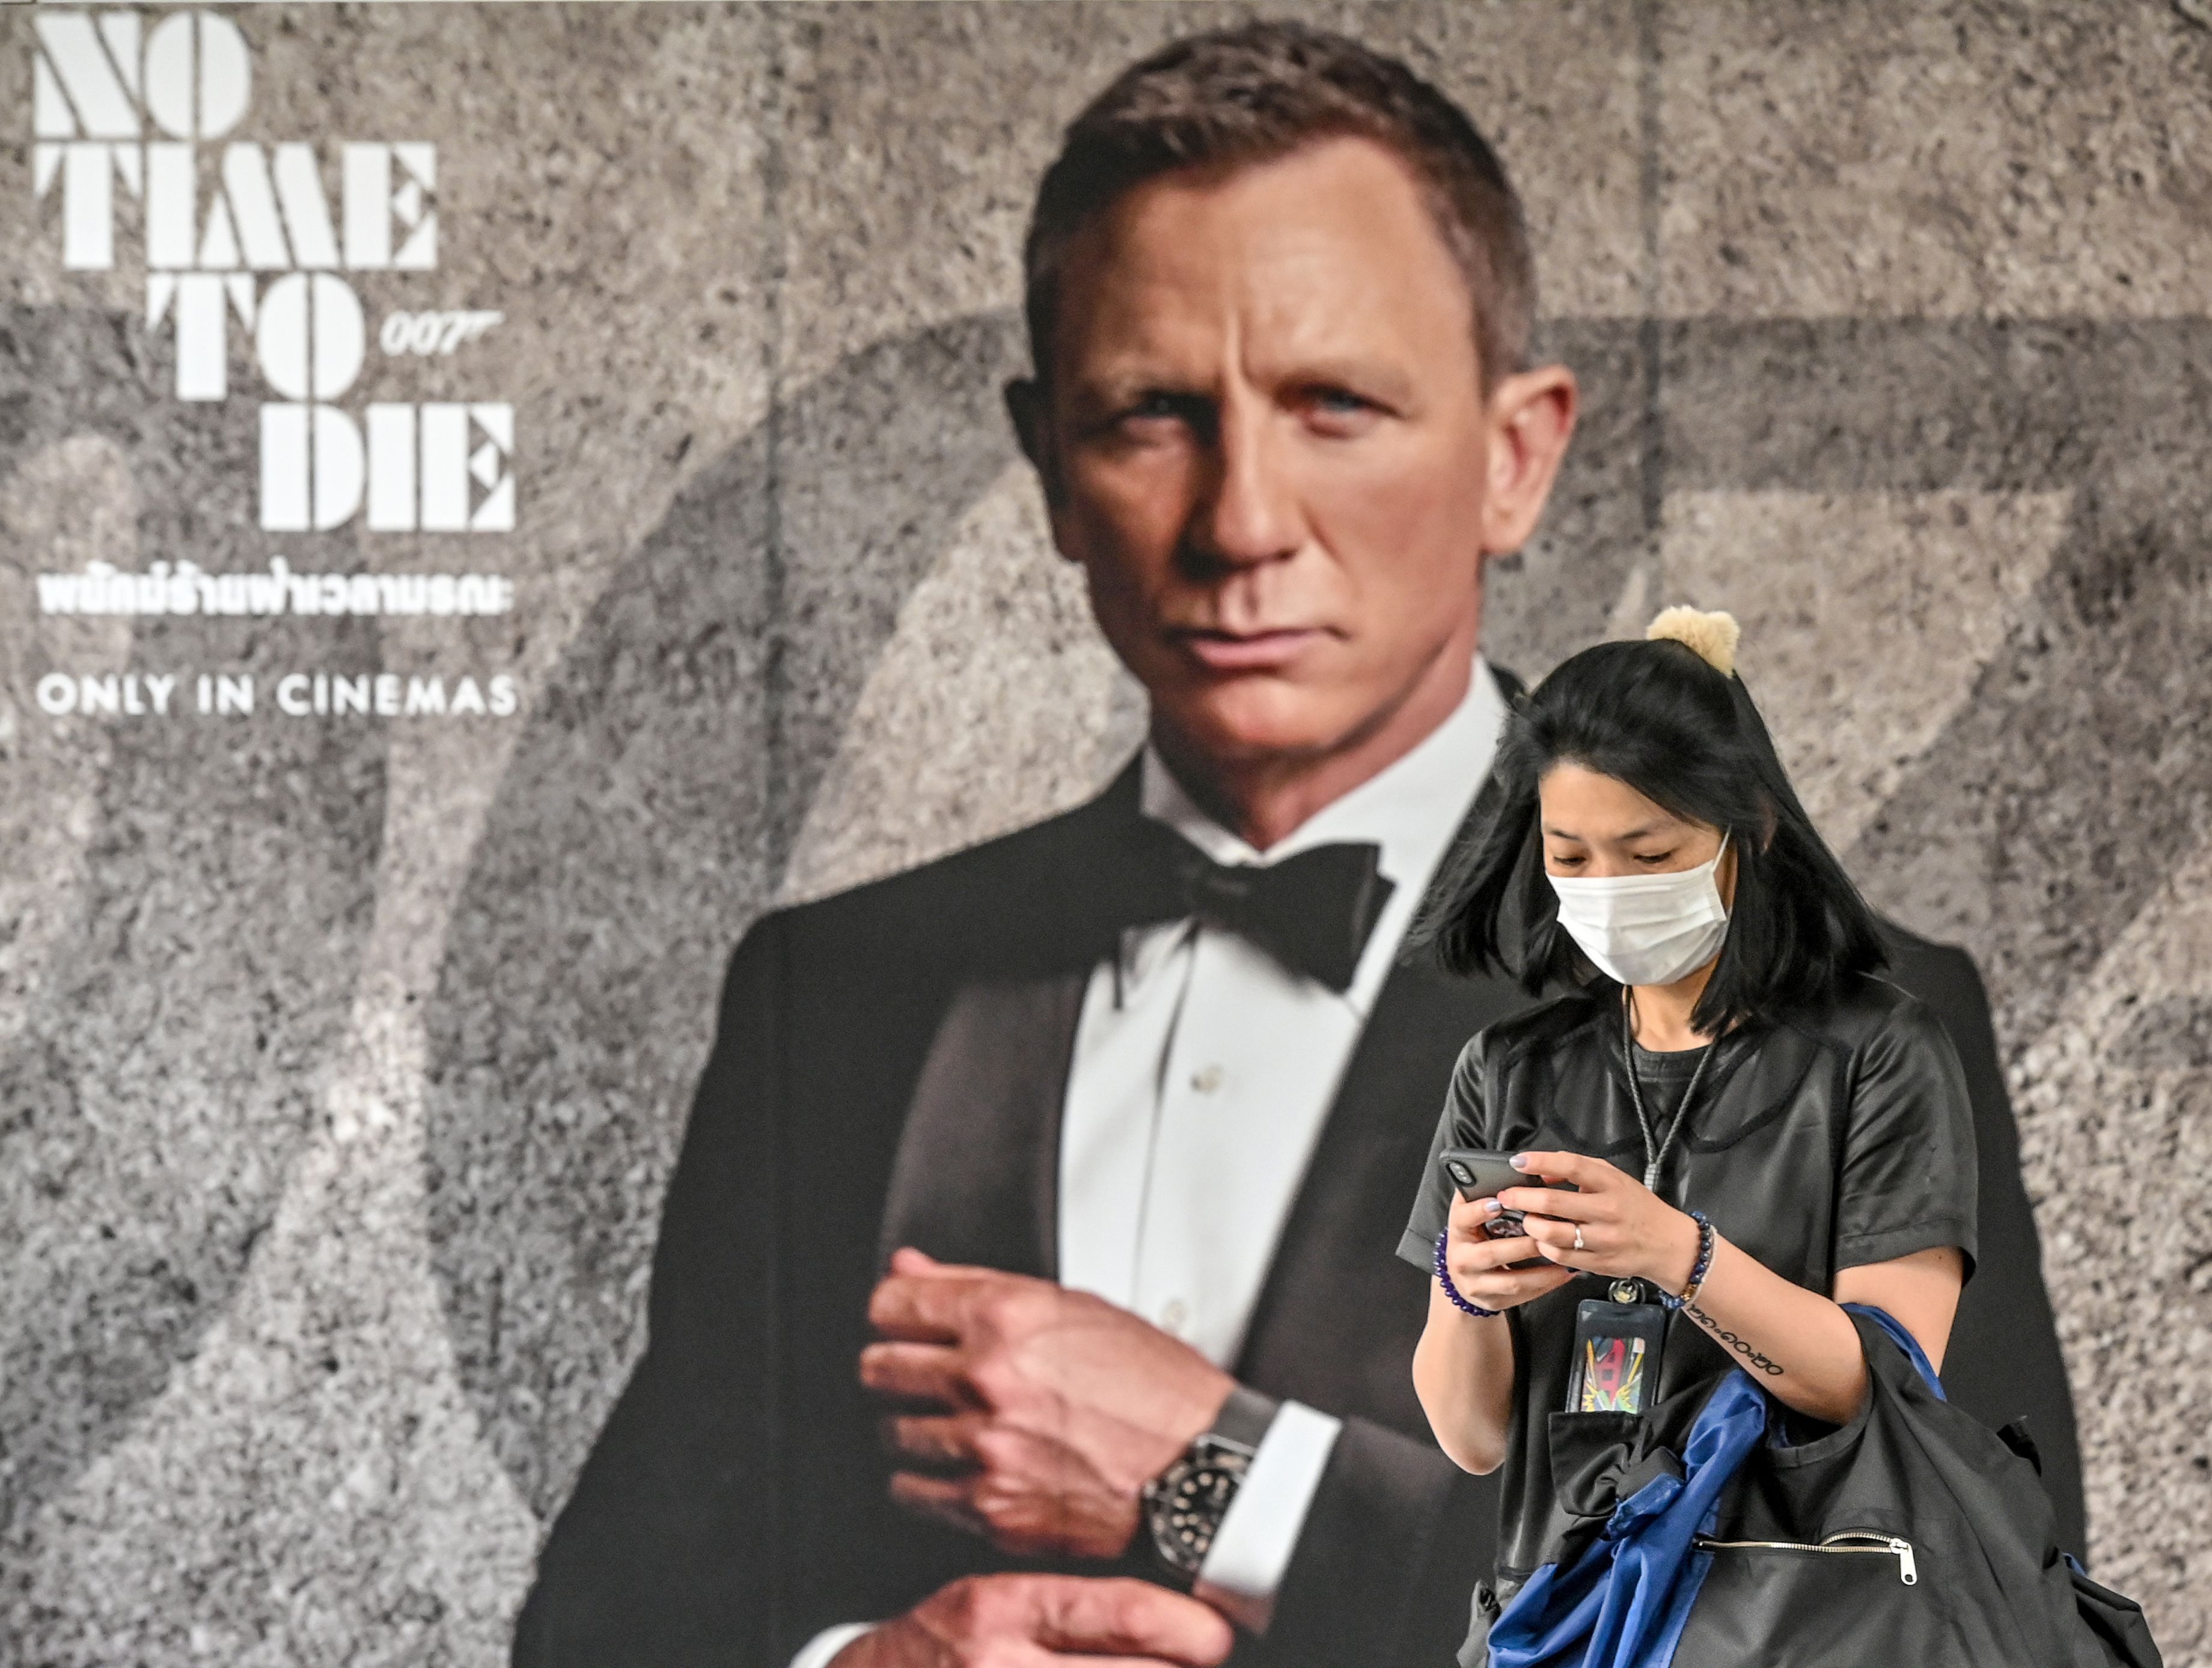 Its Kind of a Funny Story Craig Daniel Craig News Articles Stories Trends for Today